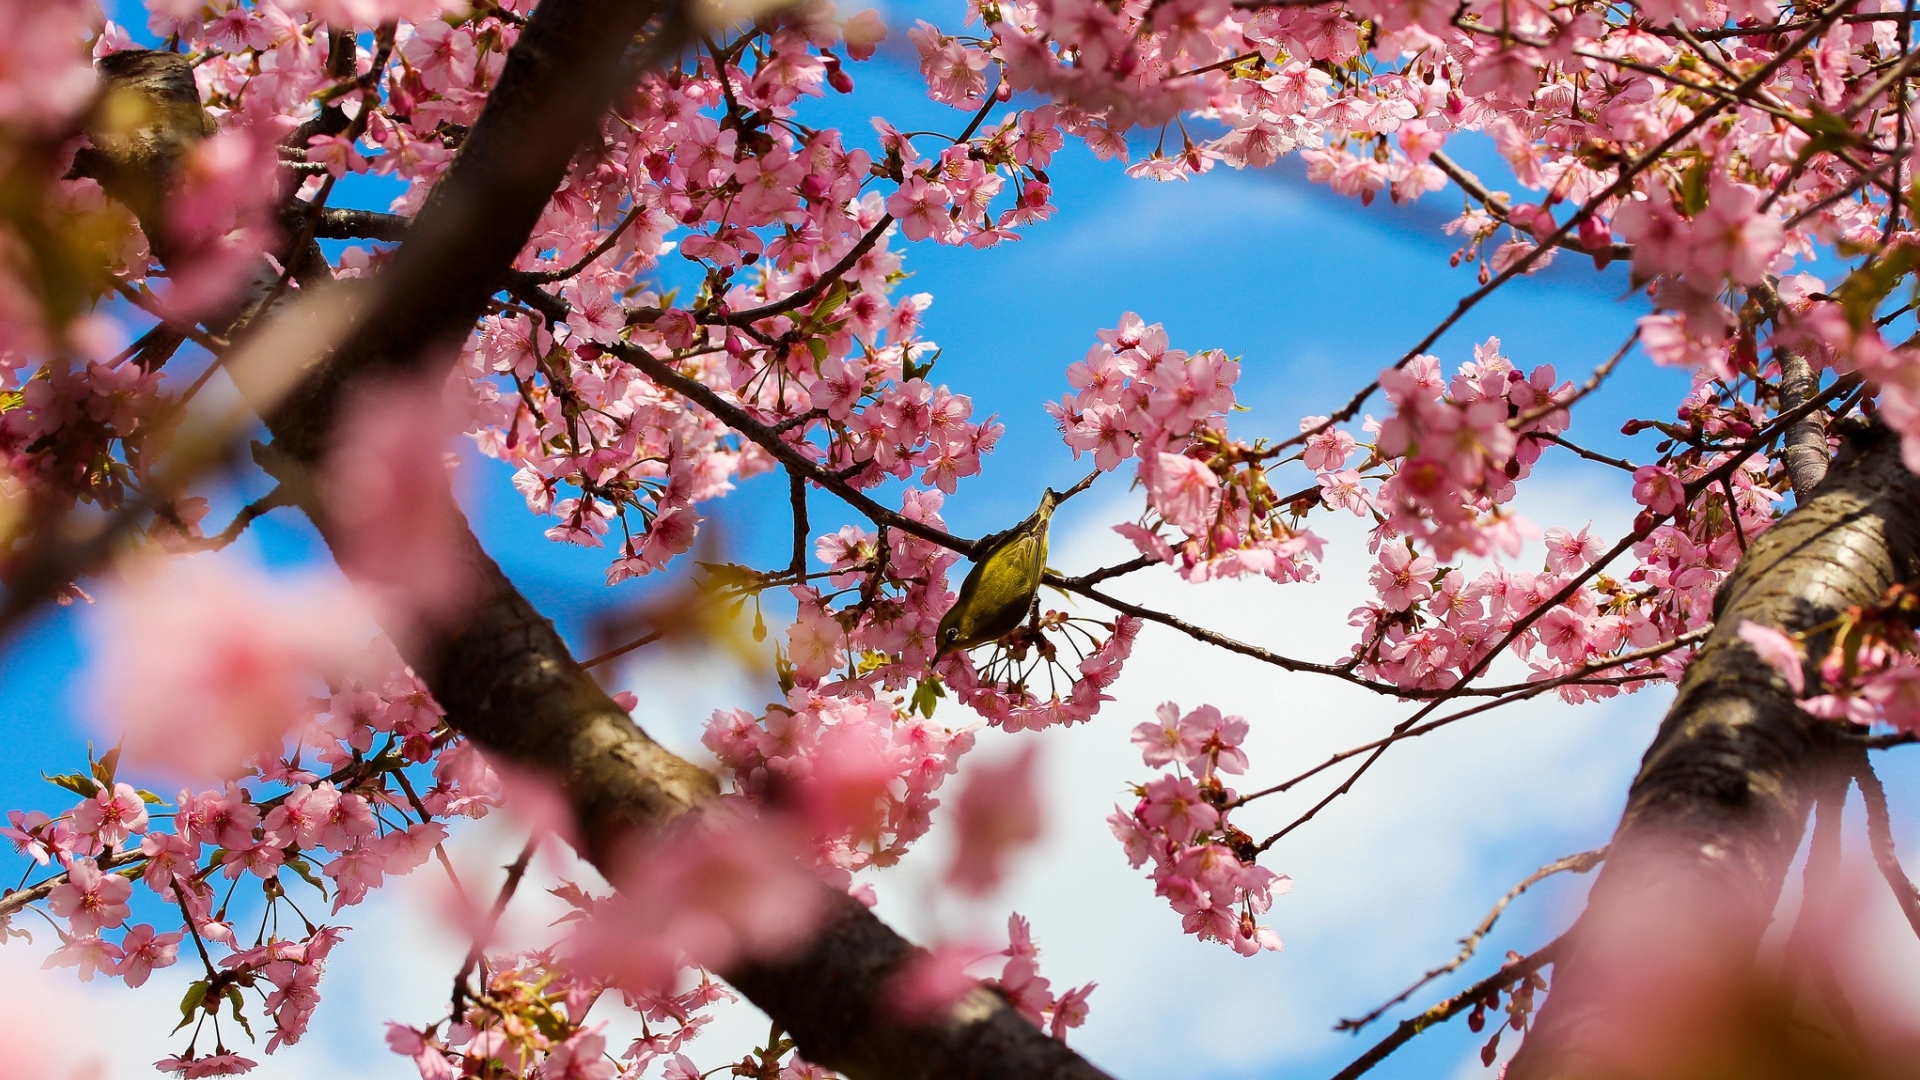 Picture of cherry blossoms HD Desktop Wallpaper | HD Desktop Wallpaper